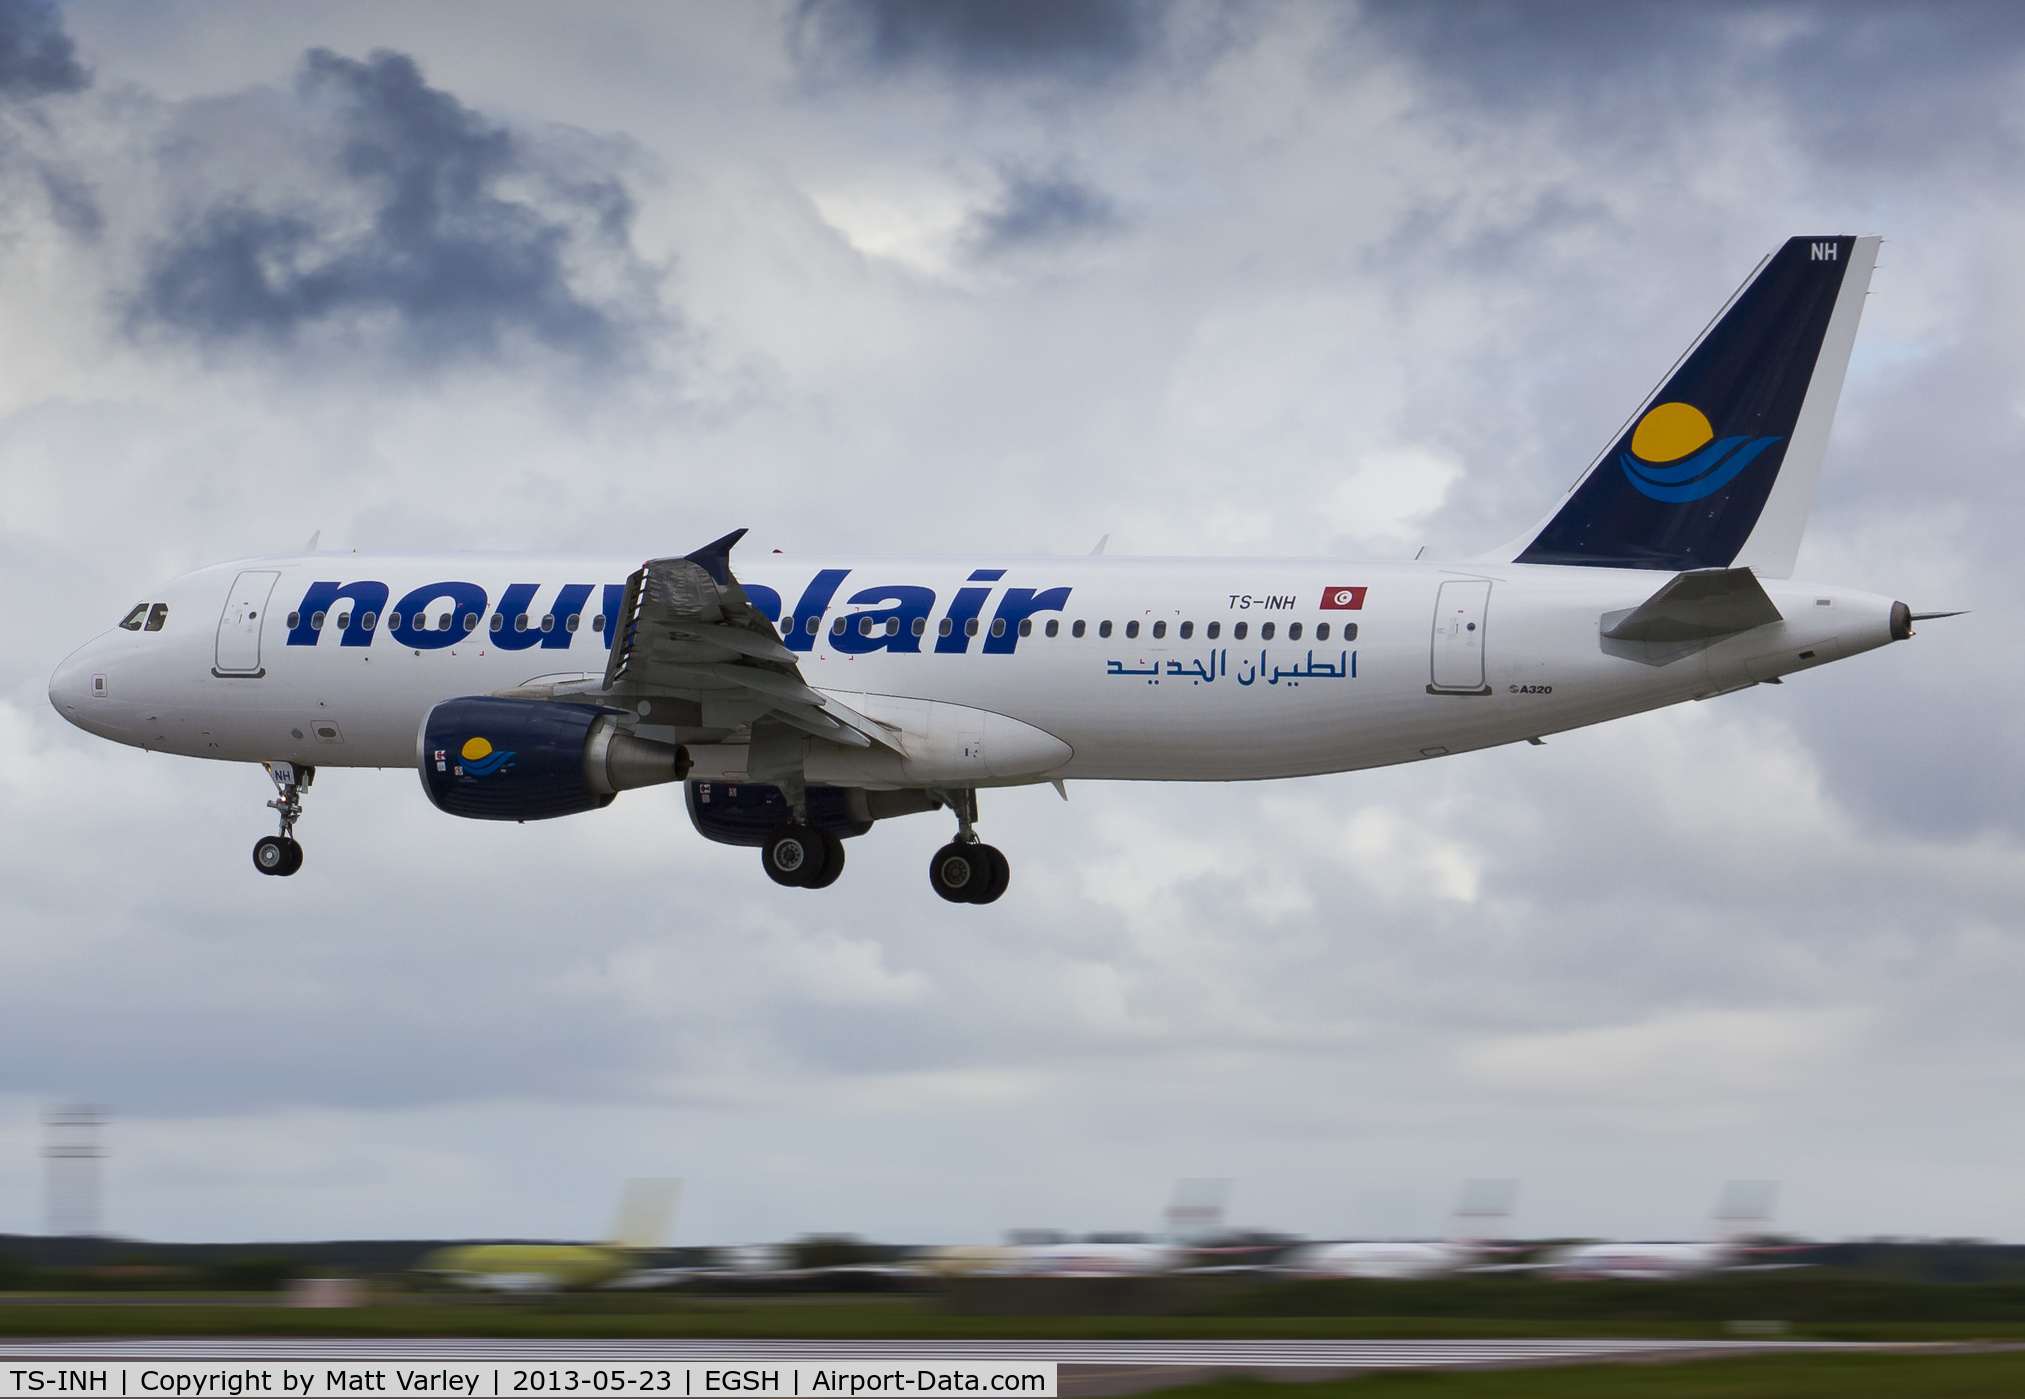 TS-INH, 2011 Airbus A320-214 C/N 4623, Arriving at a dull NWI...